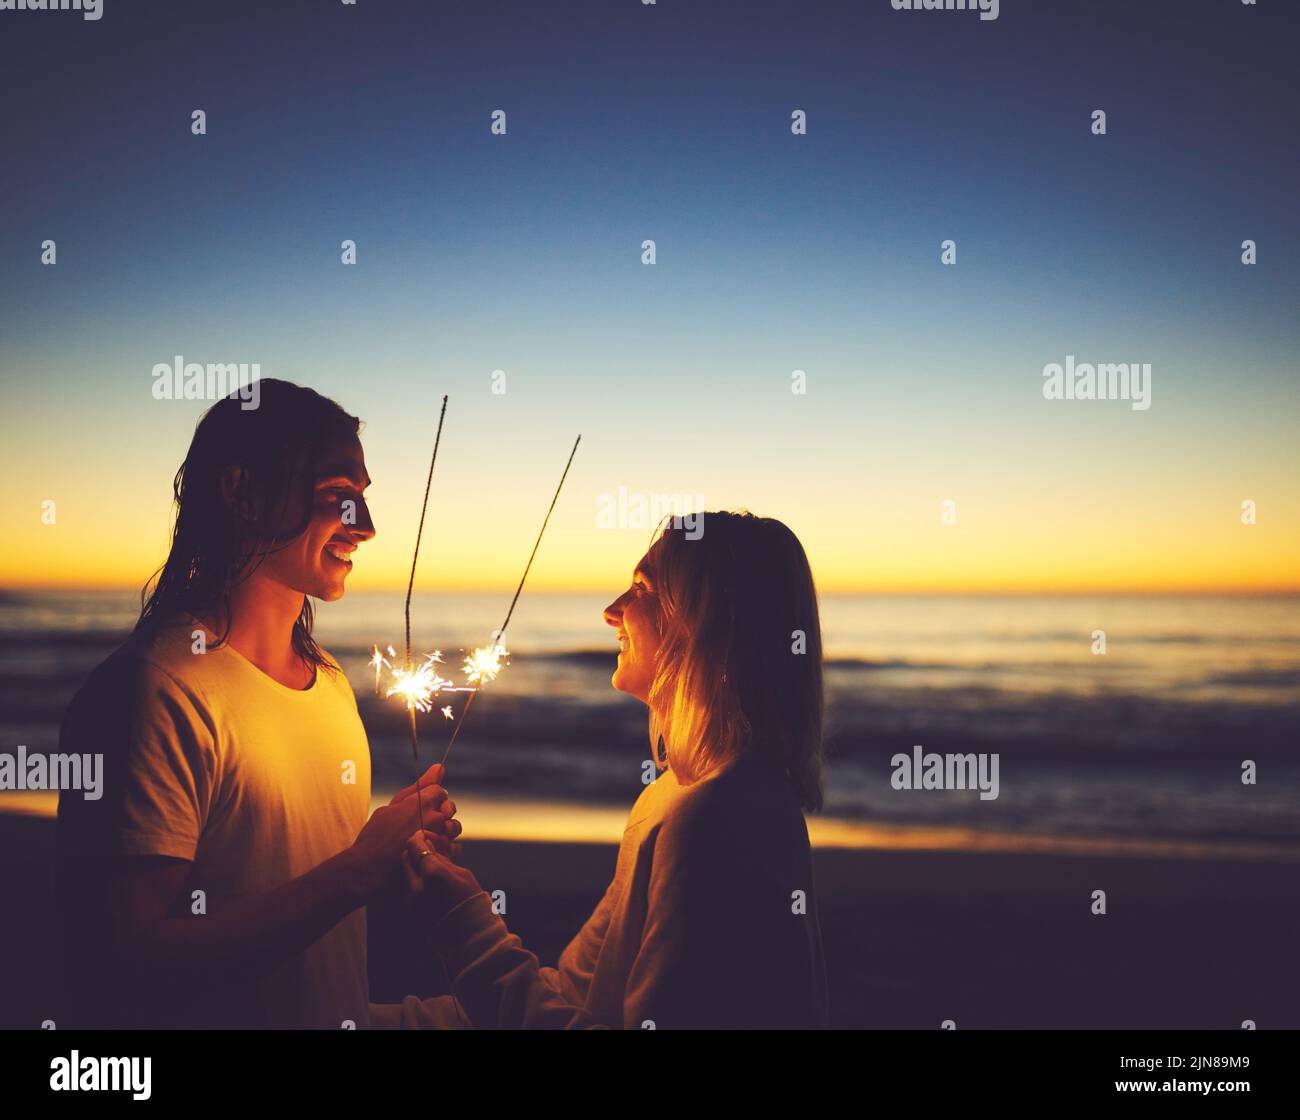 Hejse Patent sammenholdt Within you is the light of a thousand suns. a young couple playing with  sparklers on the beach at night Stock Photo - Alamy